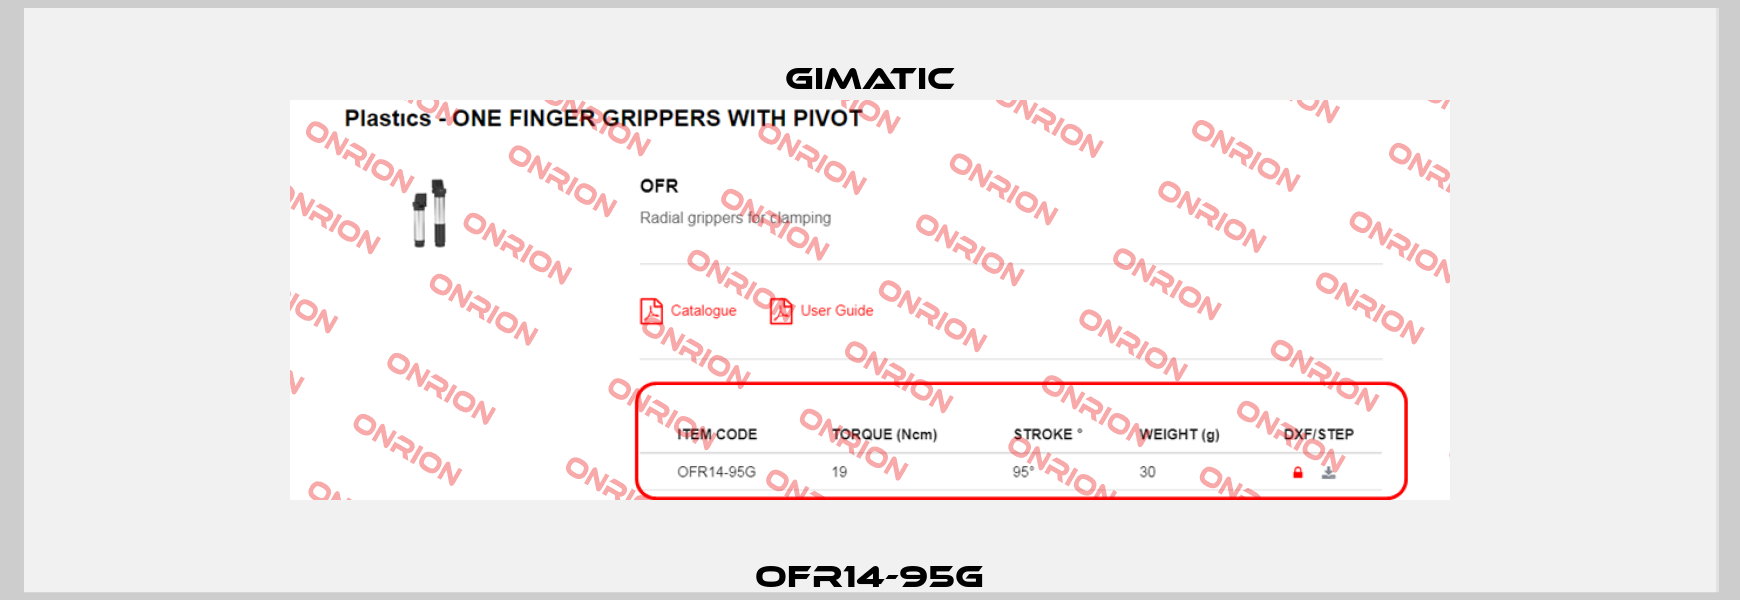 OFR14-95G Gimatic